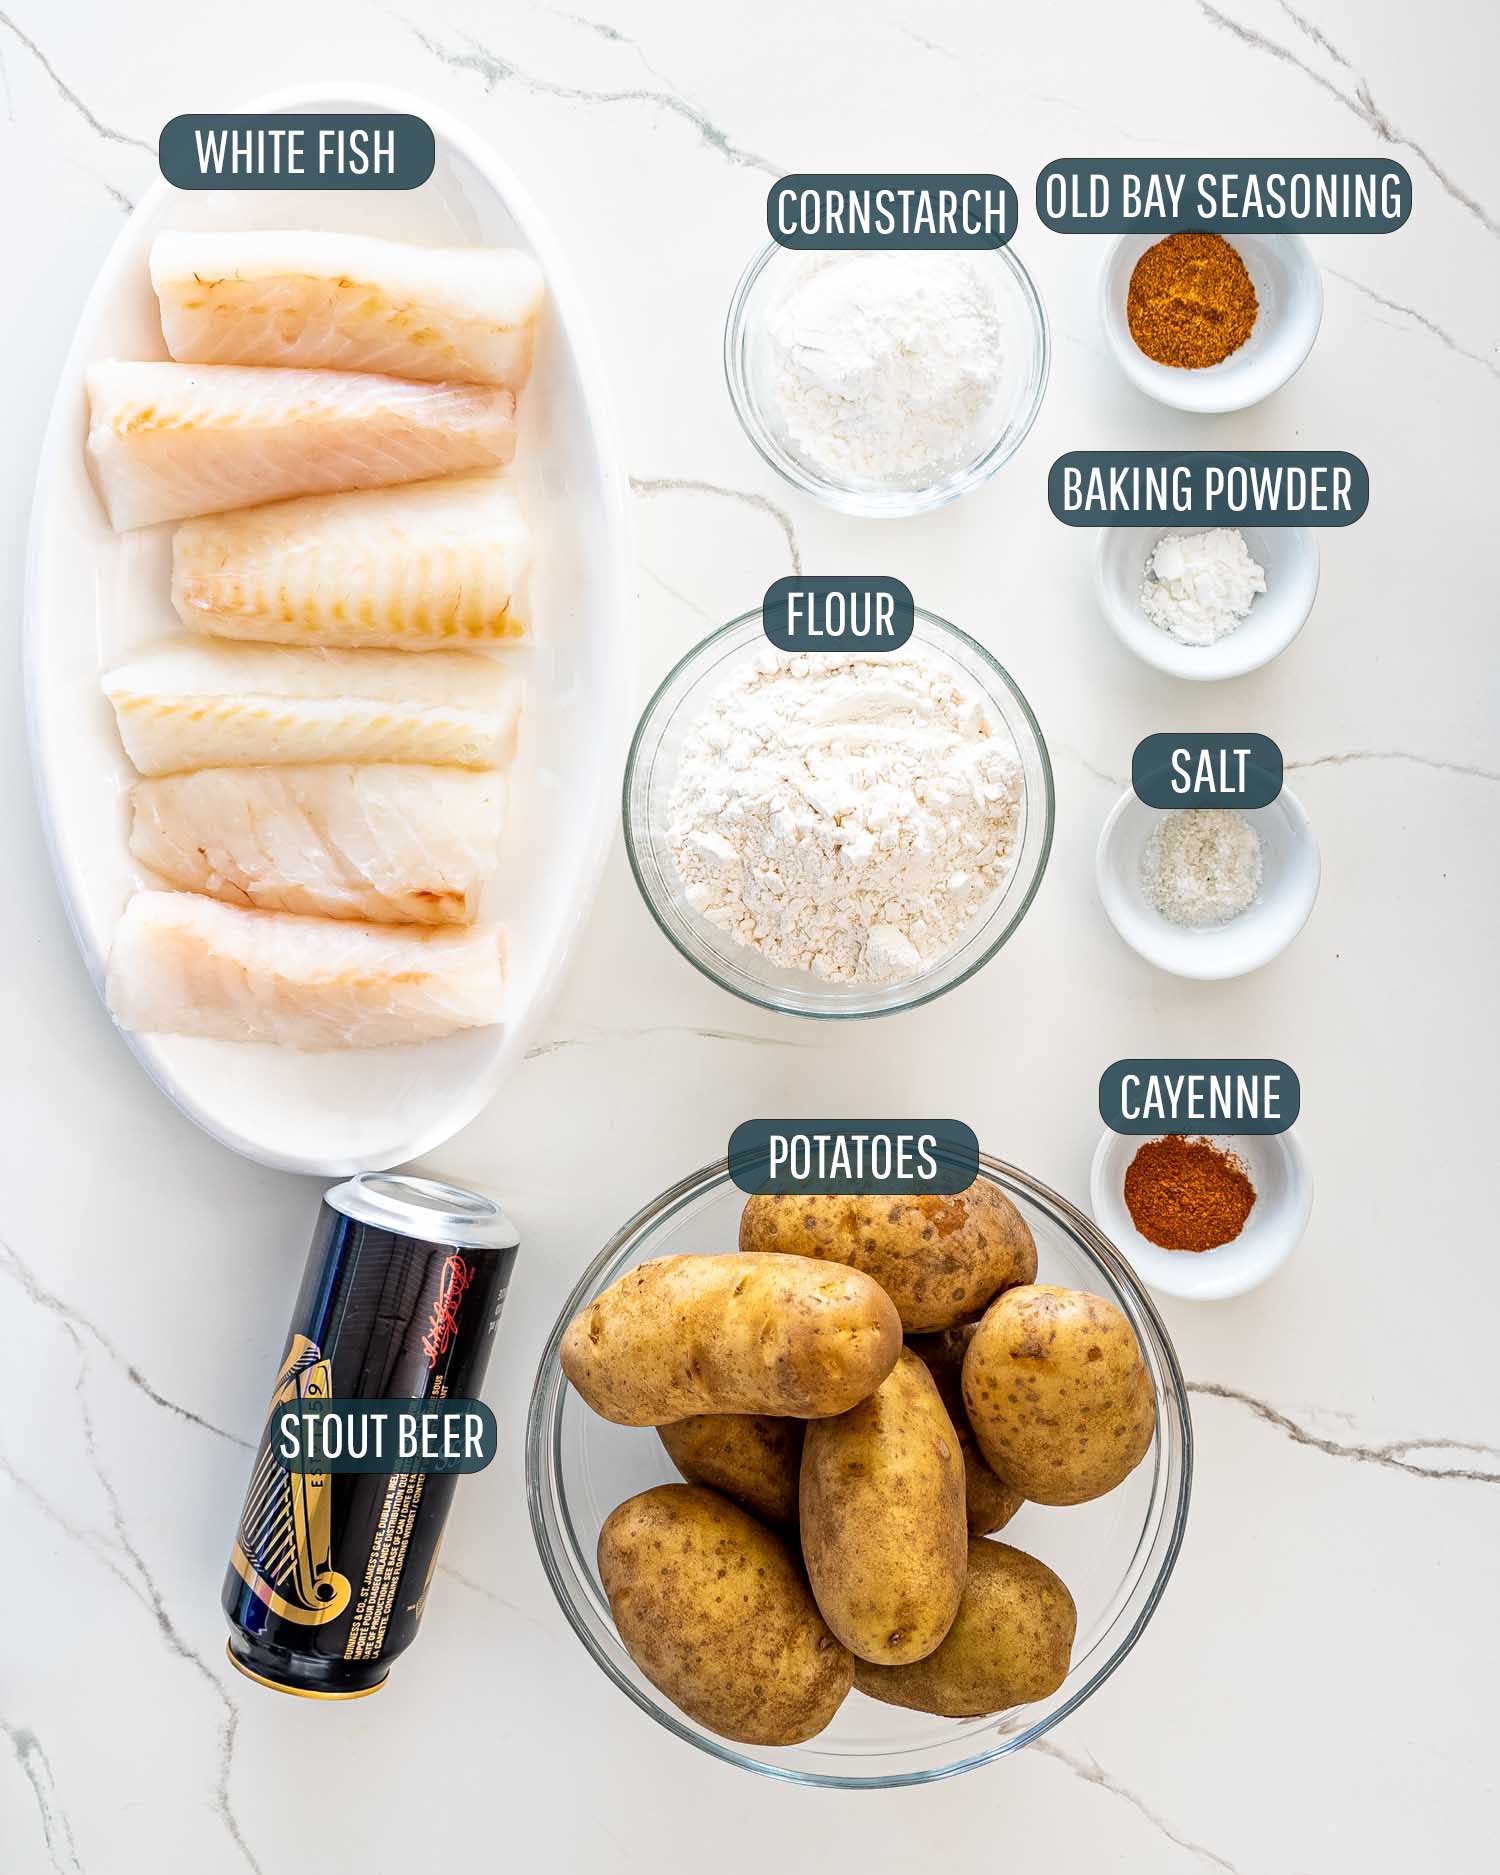 ingredients needed to make fish and chips.